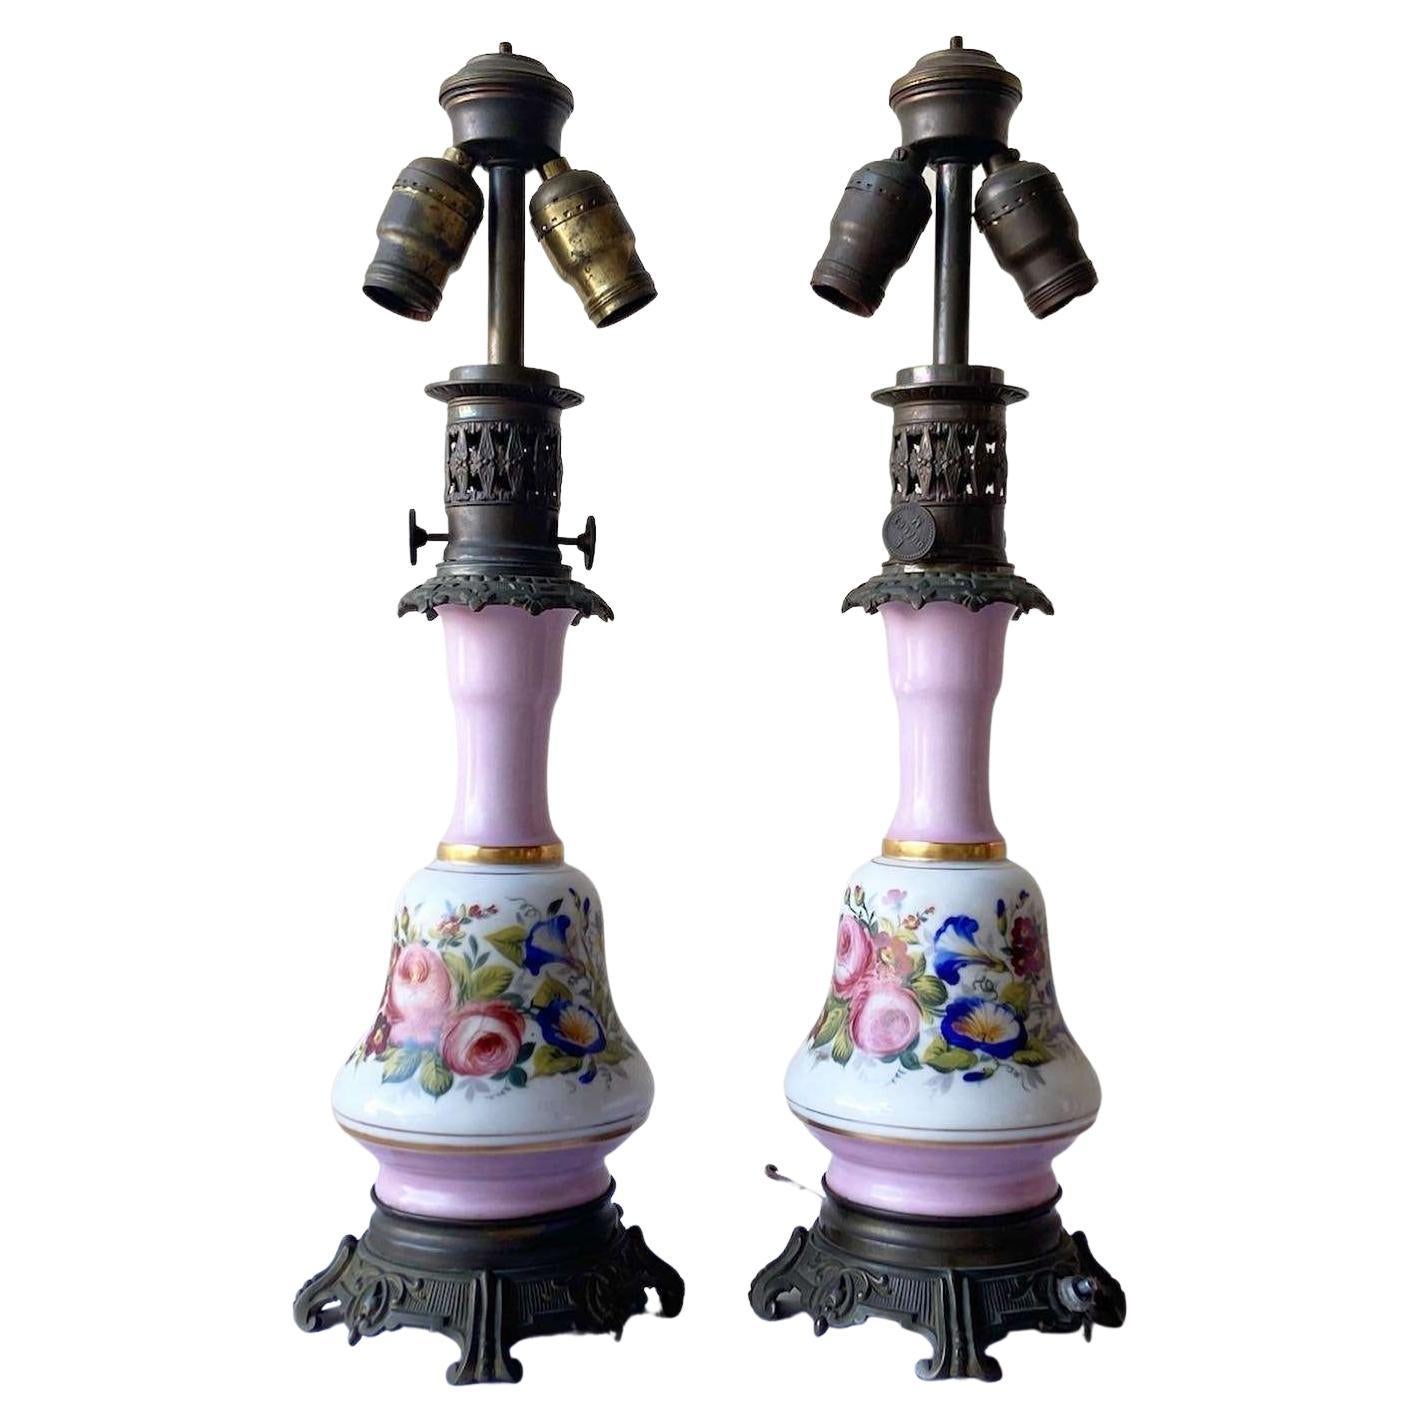 Vintage French Pink and White Porcelain and Brass Table Lamps - a Pair For Sale